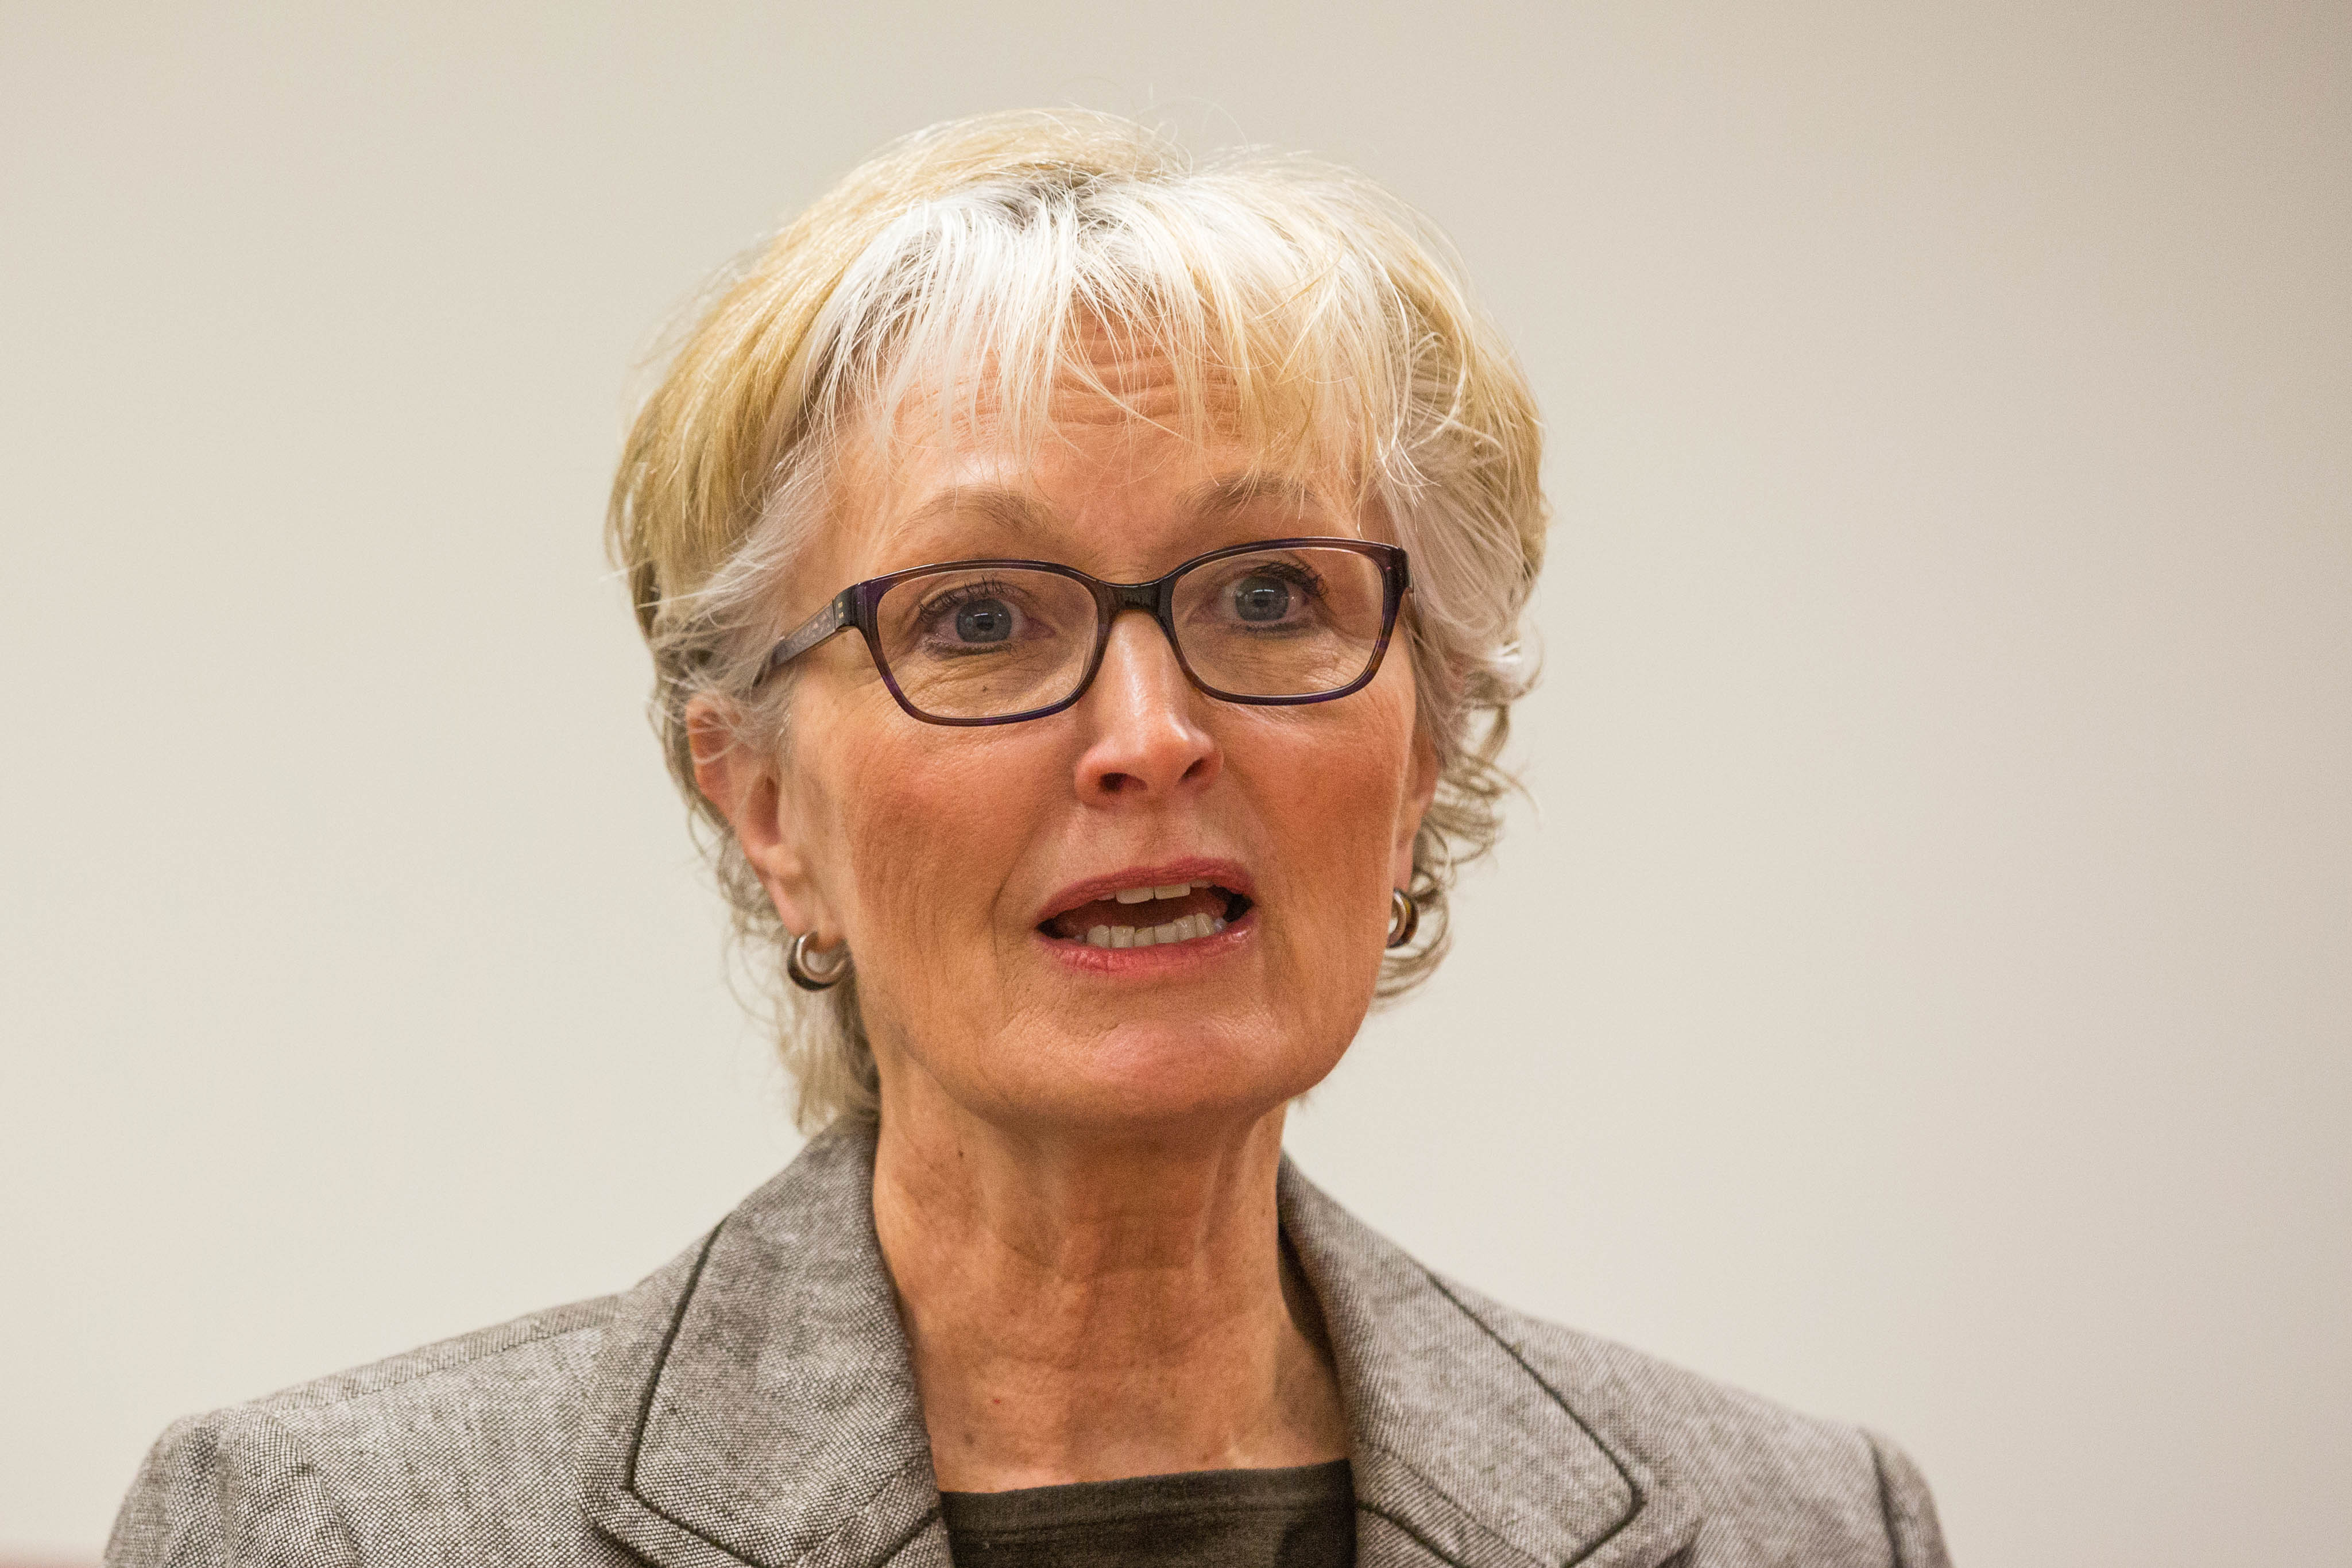 Fran Ulmer, chair of the U.S. Arctic Research Commission and Special Advisor to the U.S. Secretary of State on Arctic Science and Policy, is interviewed at the Alaska Dispatch News office on Tuesday, May 26, 2015. (Loren Holmes / Alaska Dispatch News)